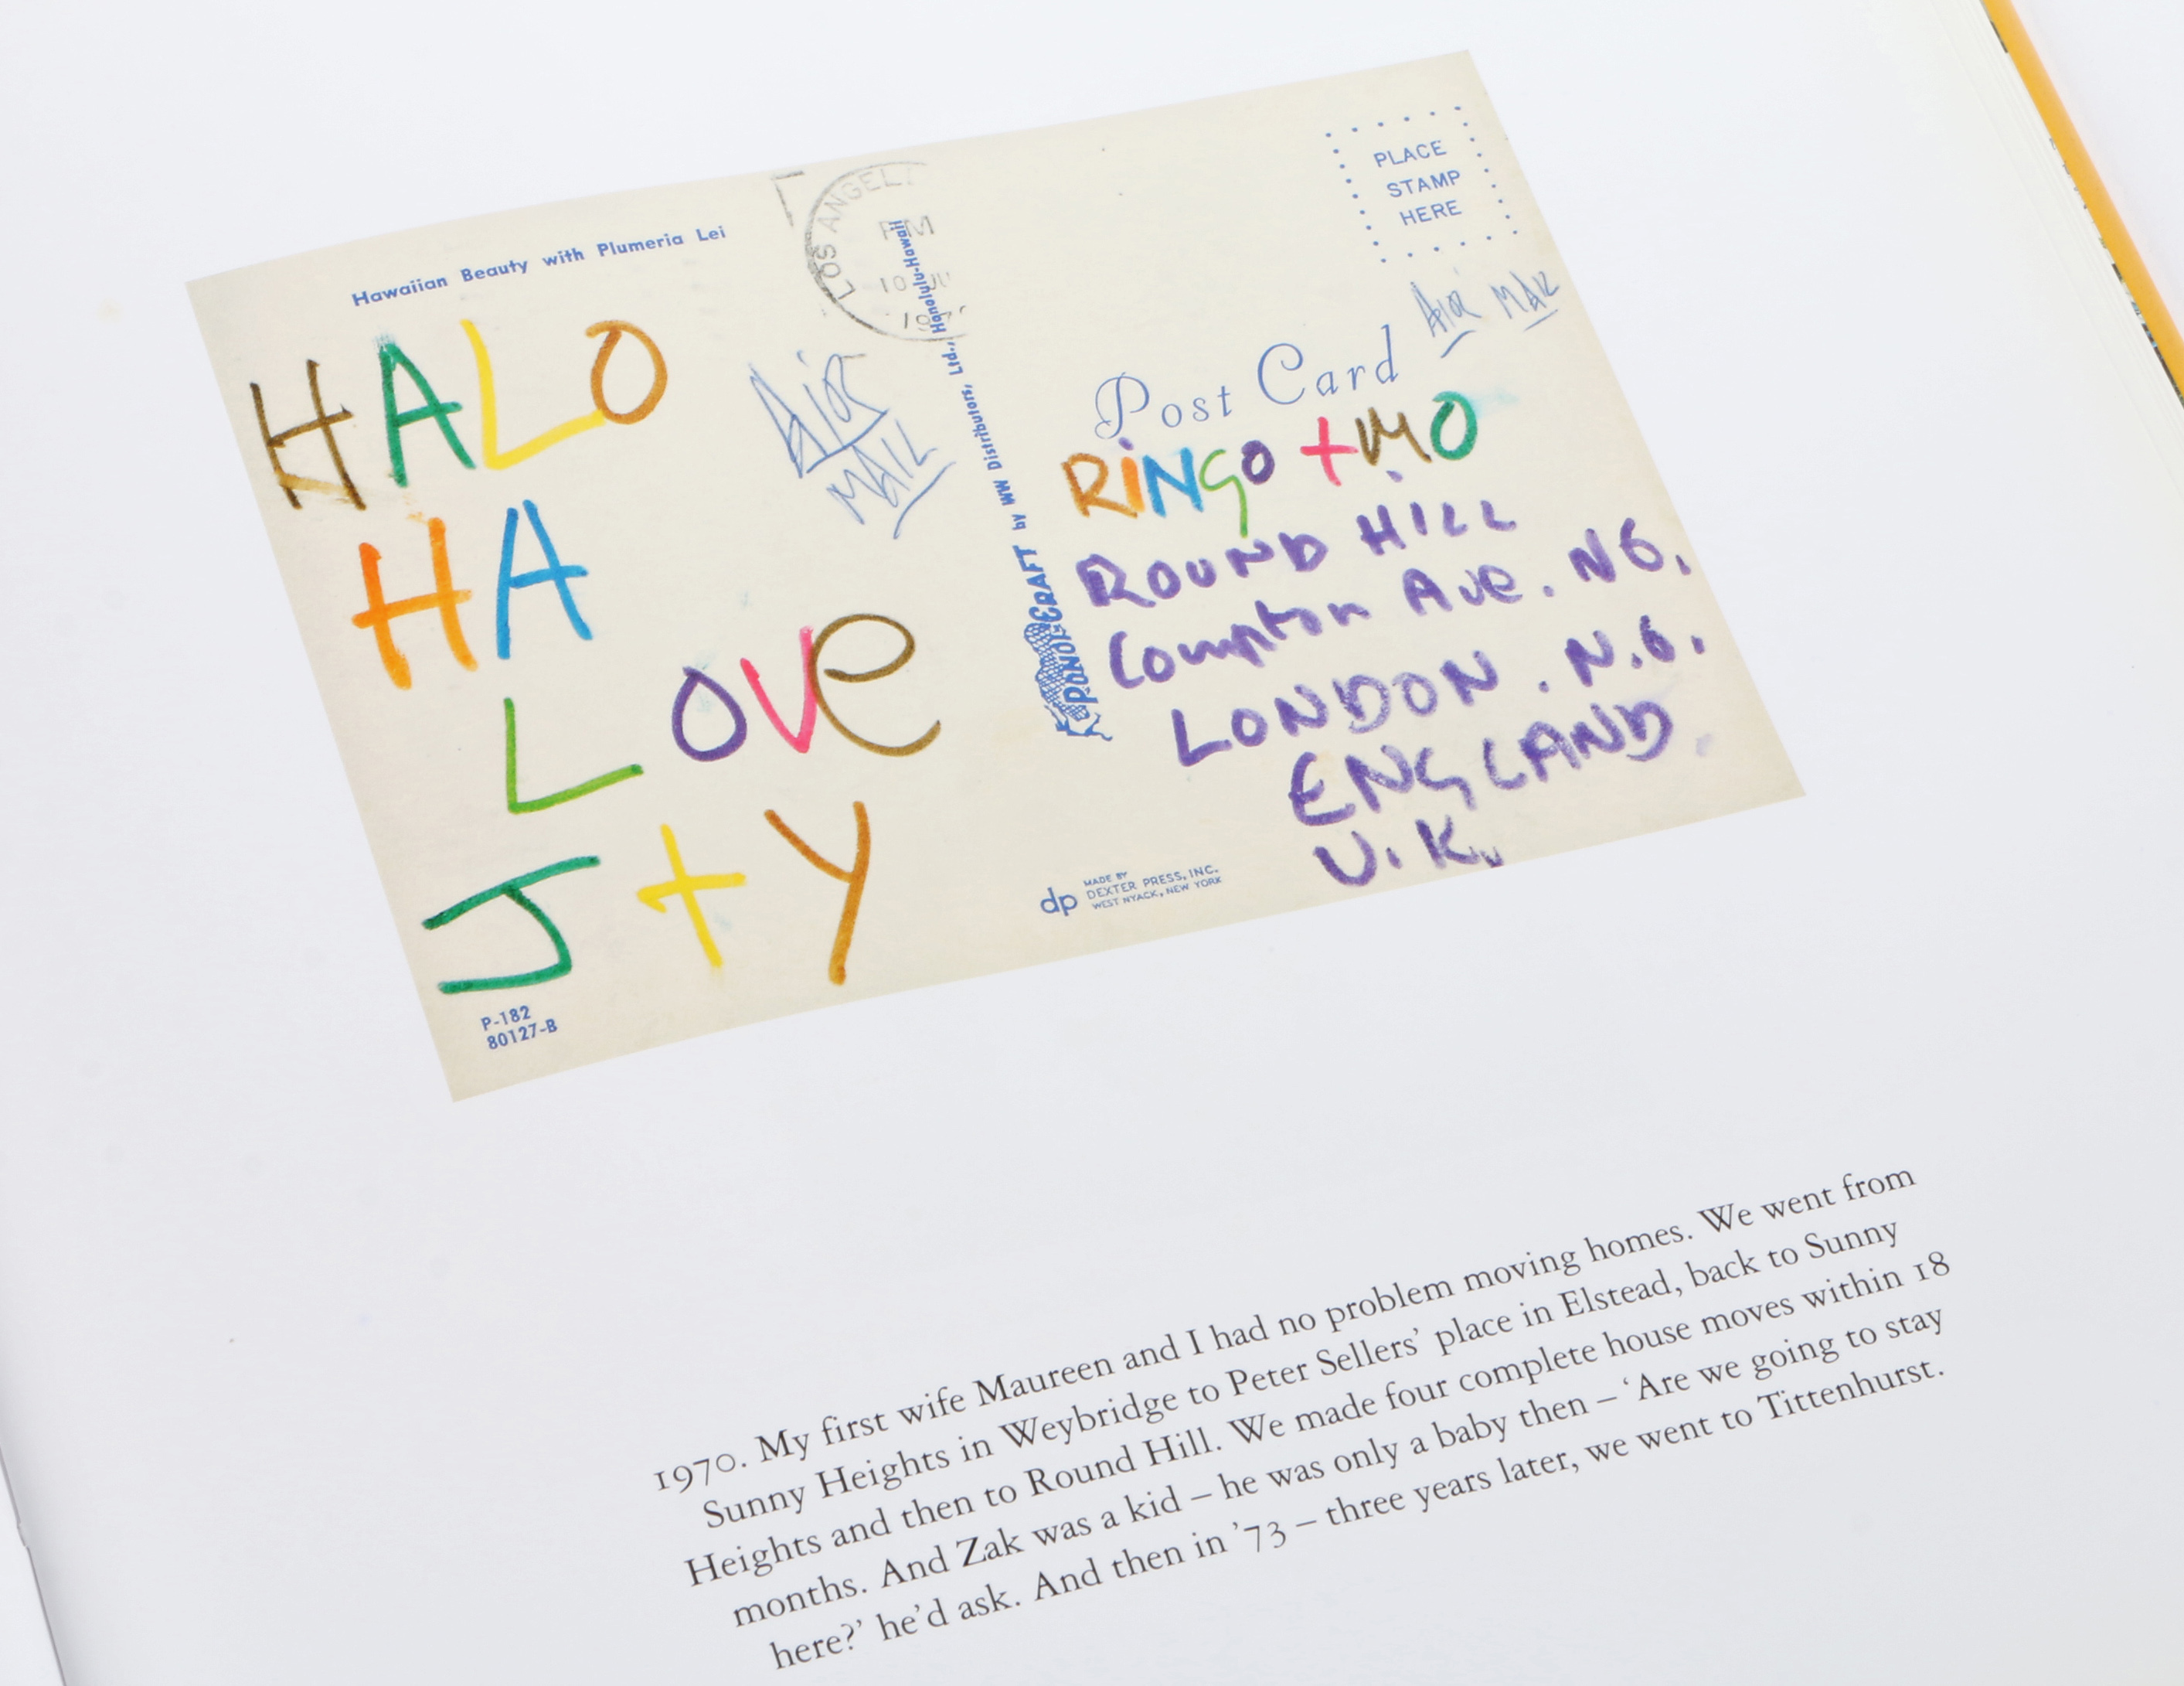 "Postcards From The Boys" by Ringo Starr, hard cover book featuring postcards sent by John Lennon, - Image 2 of 3